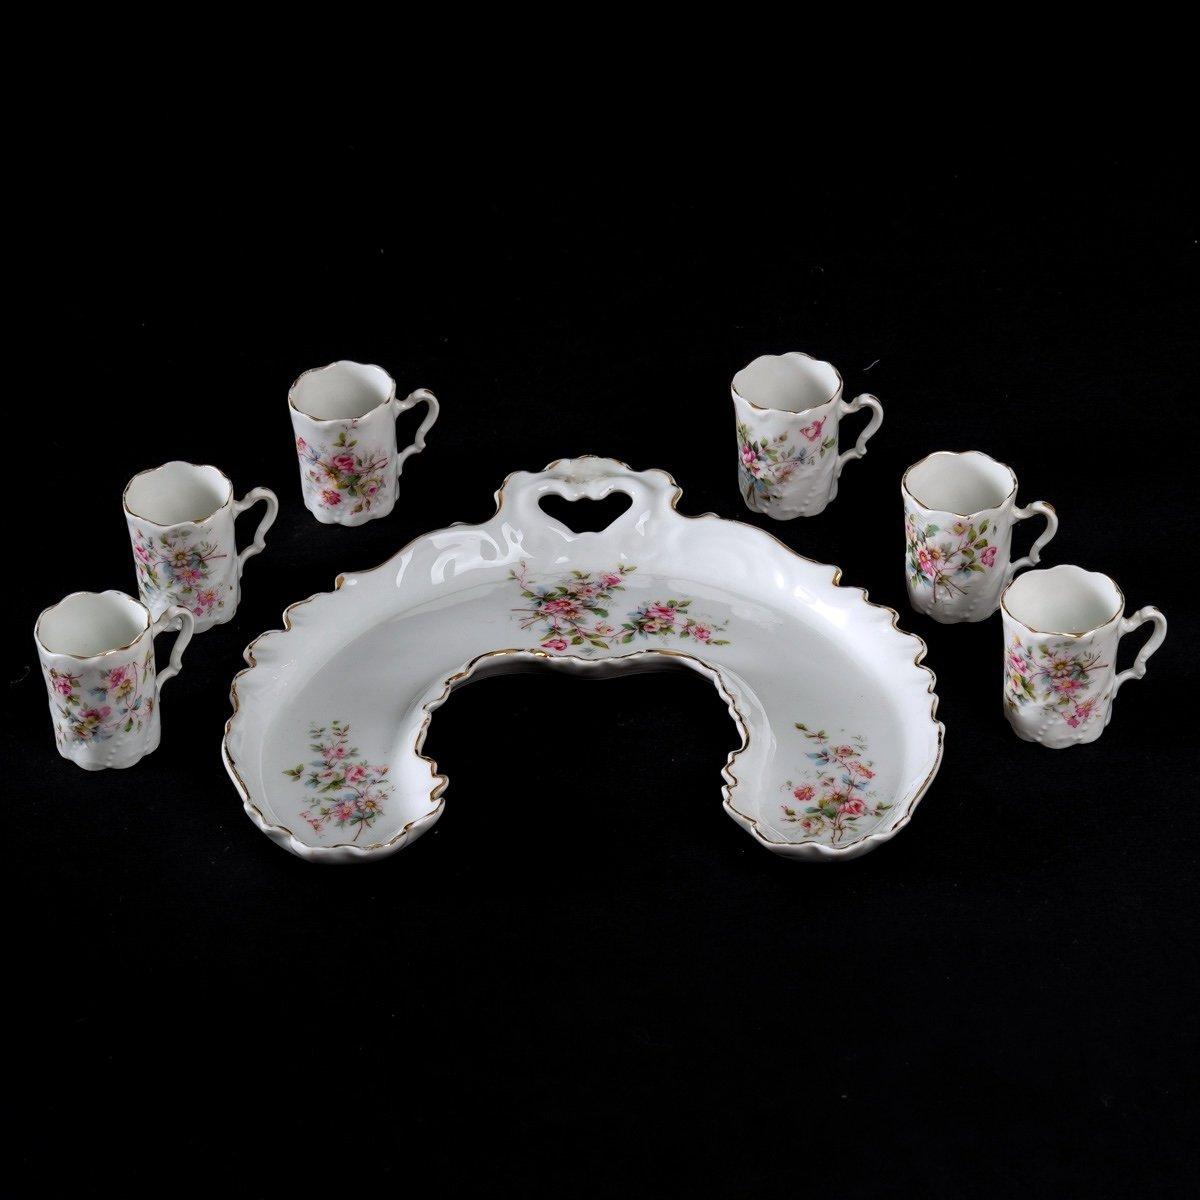 Charming mocha set in Sevres porcelain.
It consists of six cups and a tray in the shape of a 